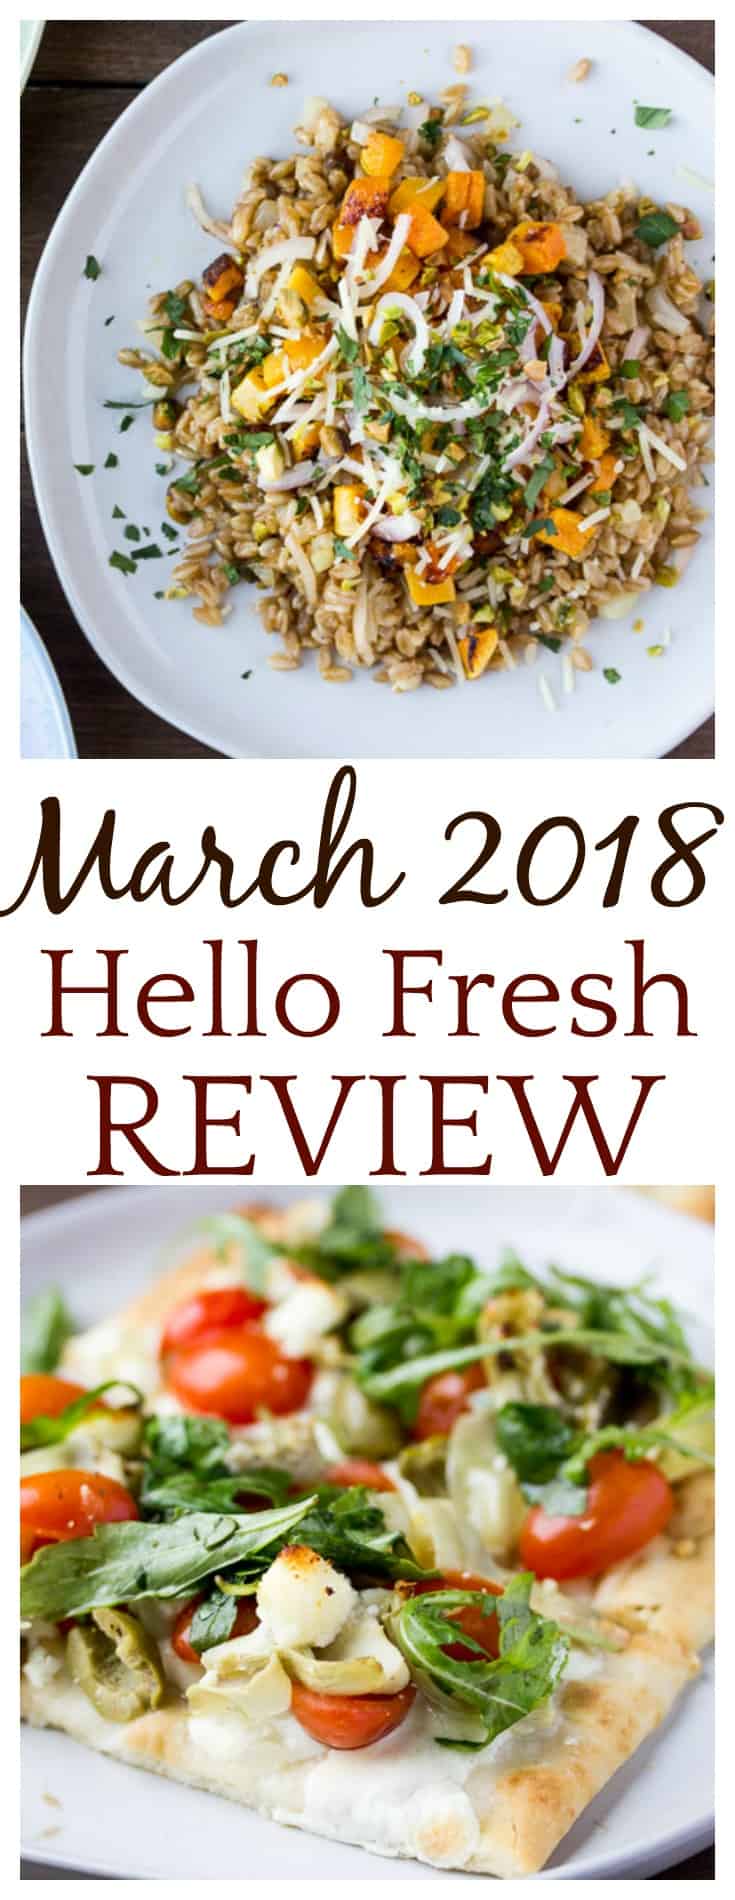 In this March 2018 Hello Fresh Review, things didn't go quite as planned, but the food was delicious! I ordered 3 vegetarian meals for this review. | Vegetarian Hello Fresh Review | #hellofresh #hellofreshreview #vegetarian #vegetarianhellofresh #hellofreshmeals 